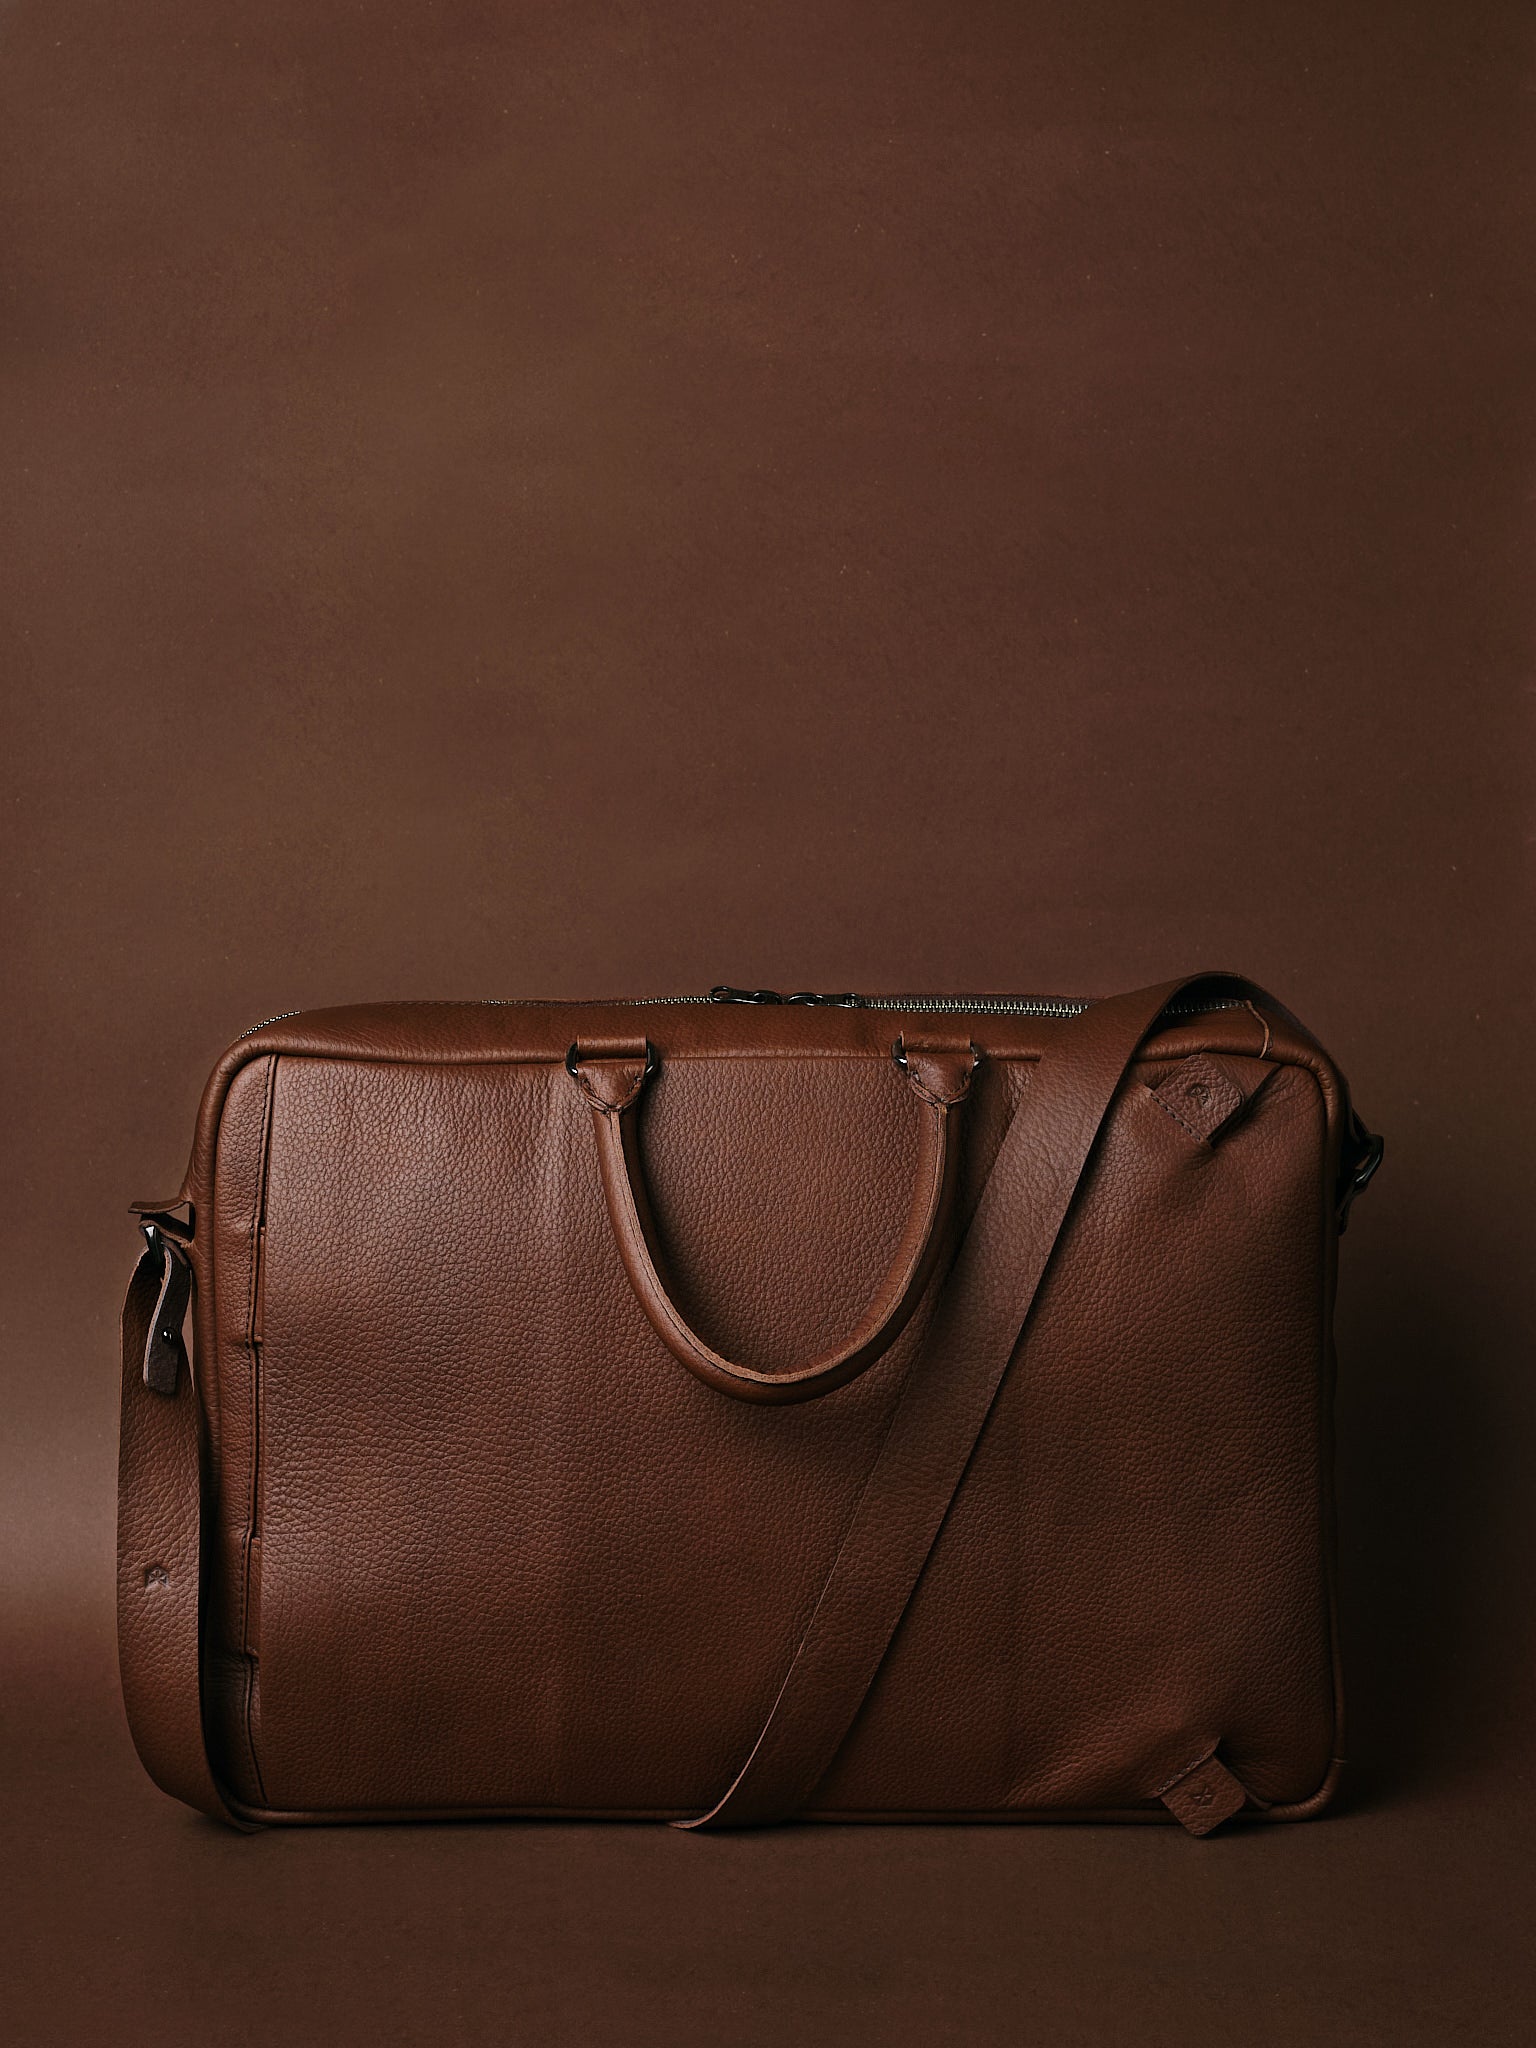 Removable Shoulder Strap. Large Briefcase. Best Convertible Backpack Briefcase Brown by Capra Leather